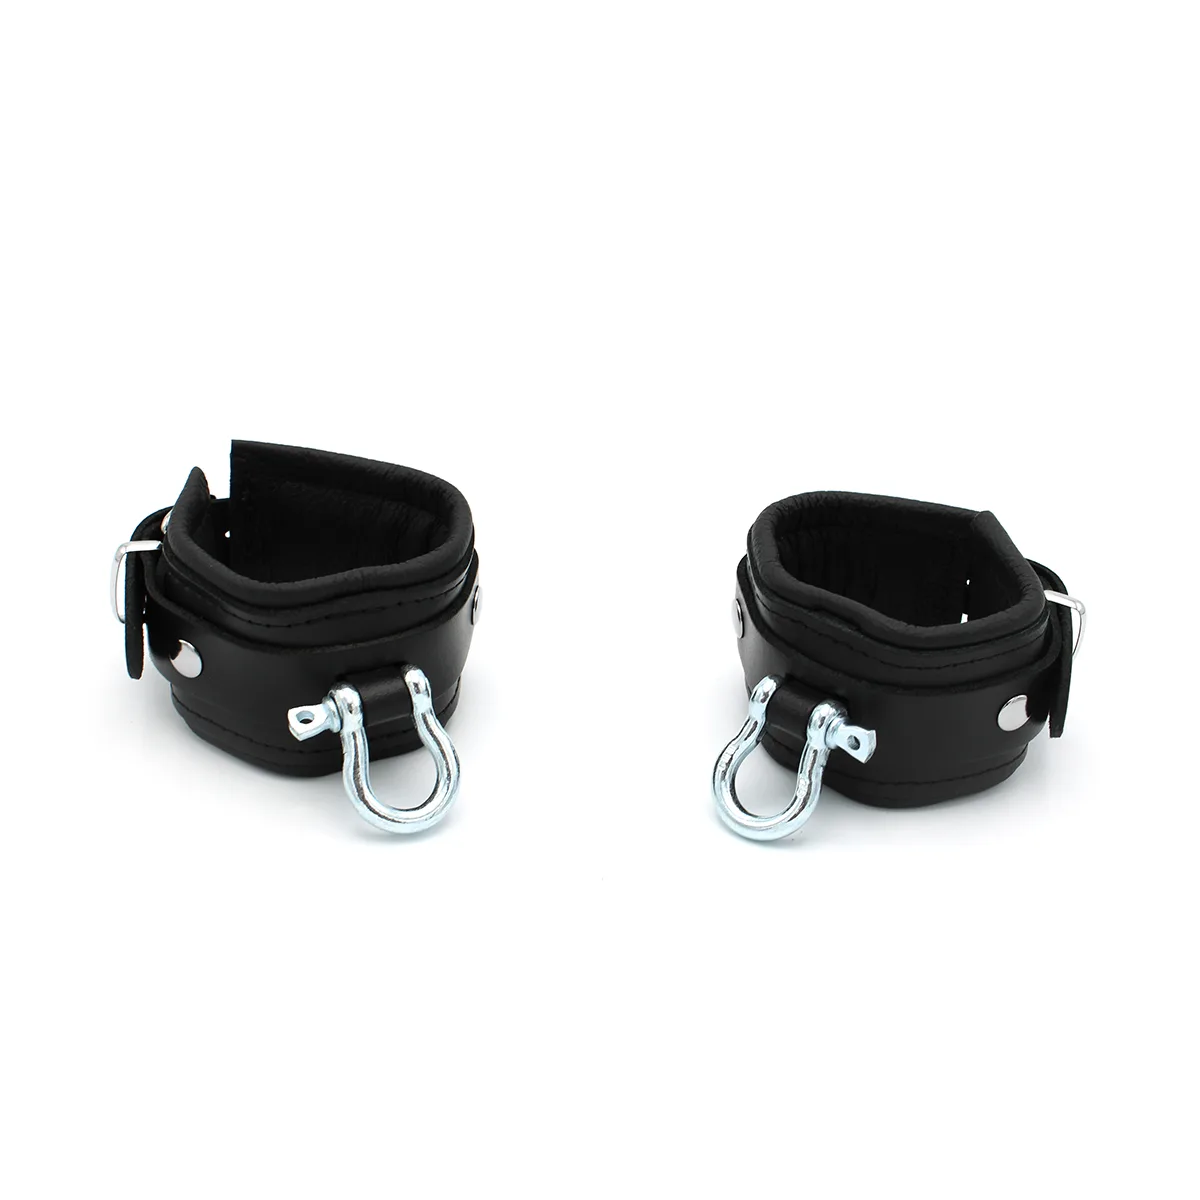 Leather-Handcuffs-with-Metal-Shackle-134-KIO-0371-1